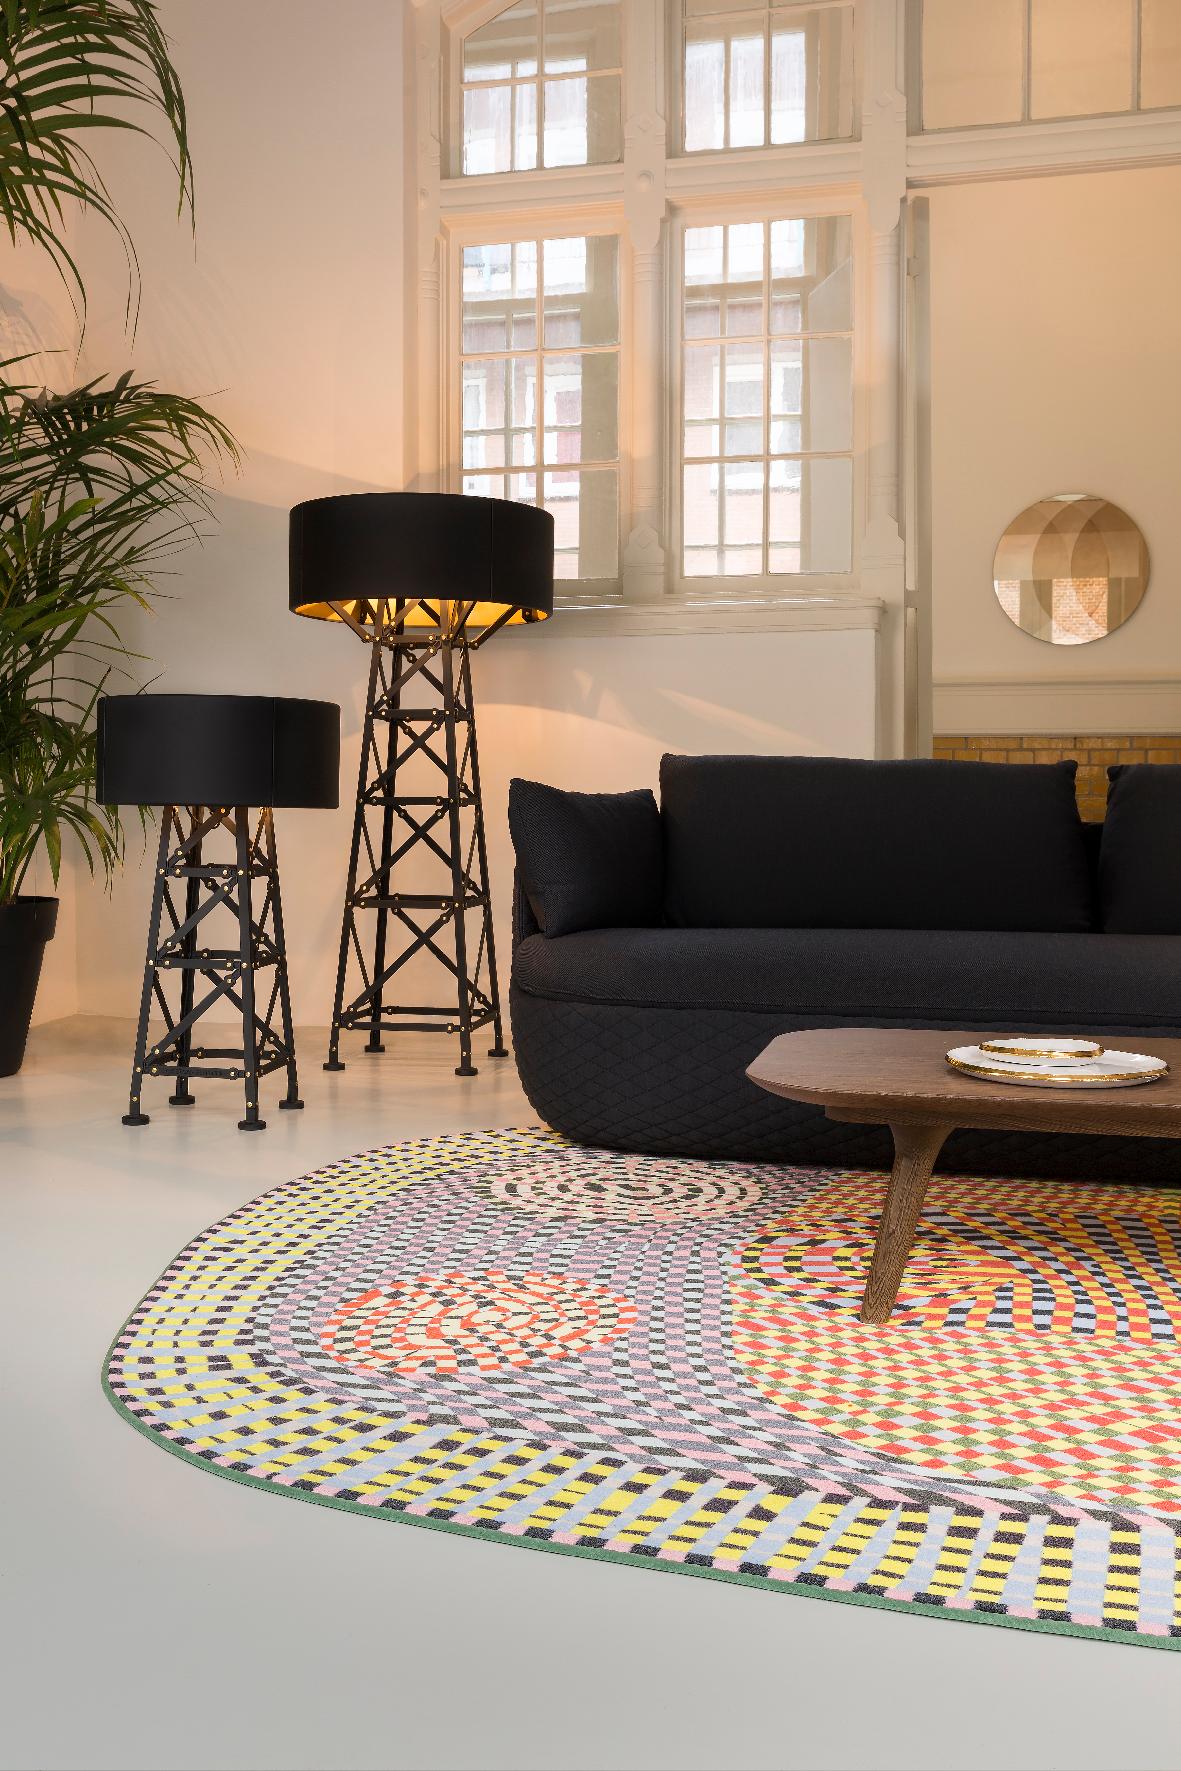 Moooi magic marker wild rug in soft yarn polyamide by Bertjan Pot

Bertjan Pot is a designer, probably best known for his Random Light (1999).The light started as a material experiment, which is basically the start of each product created by